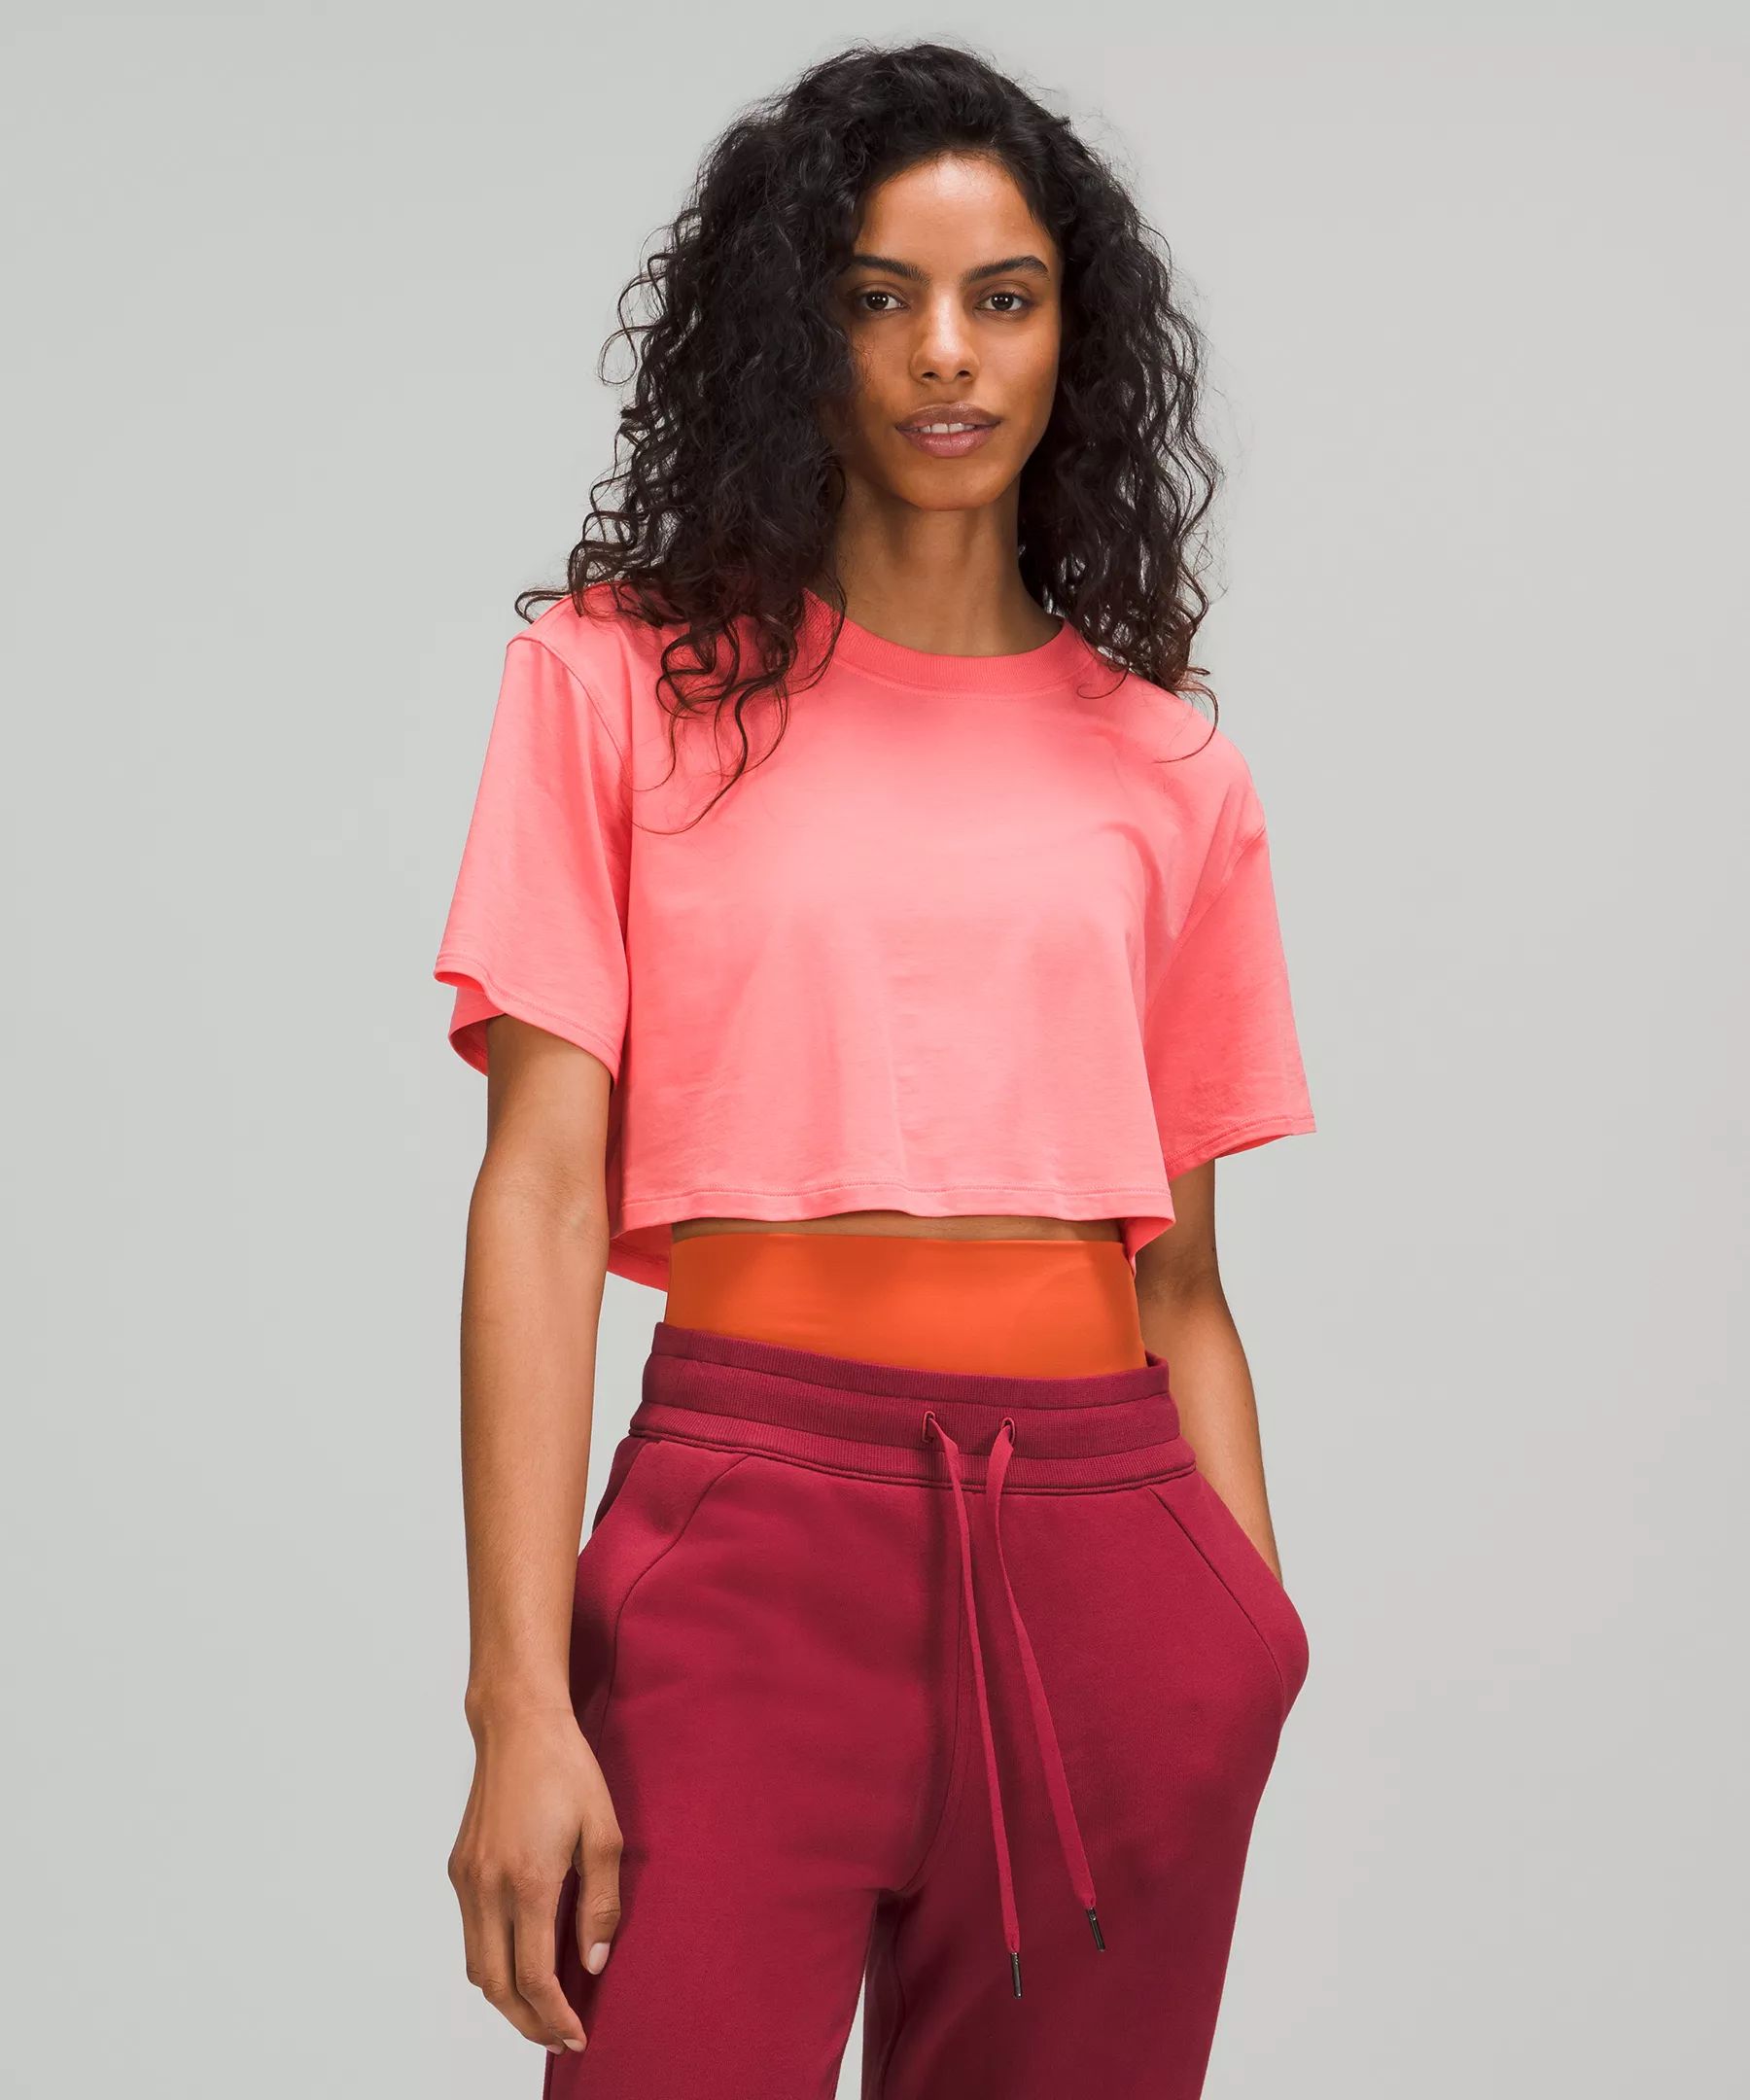 All Yours Cropped T-Shirt | Lululemon (US)